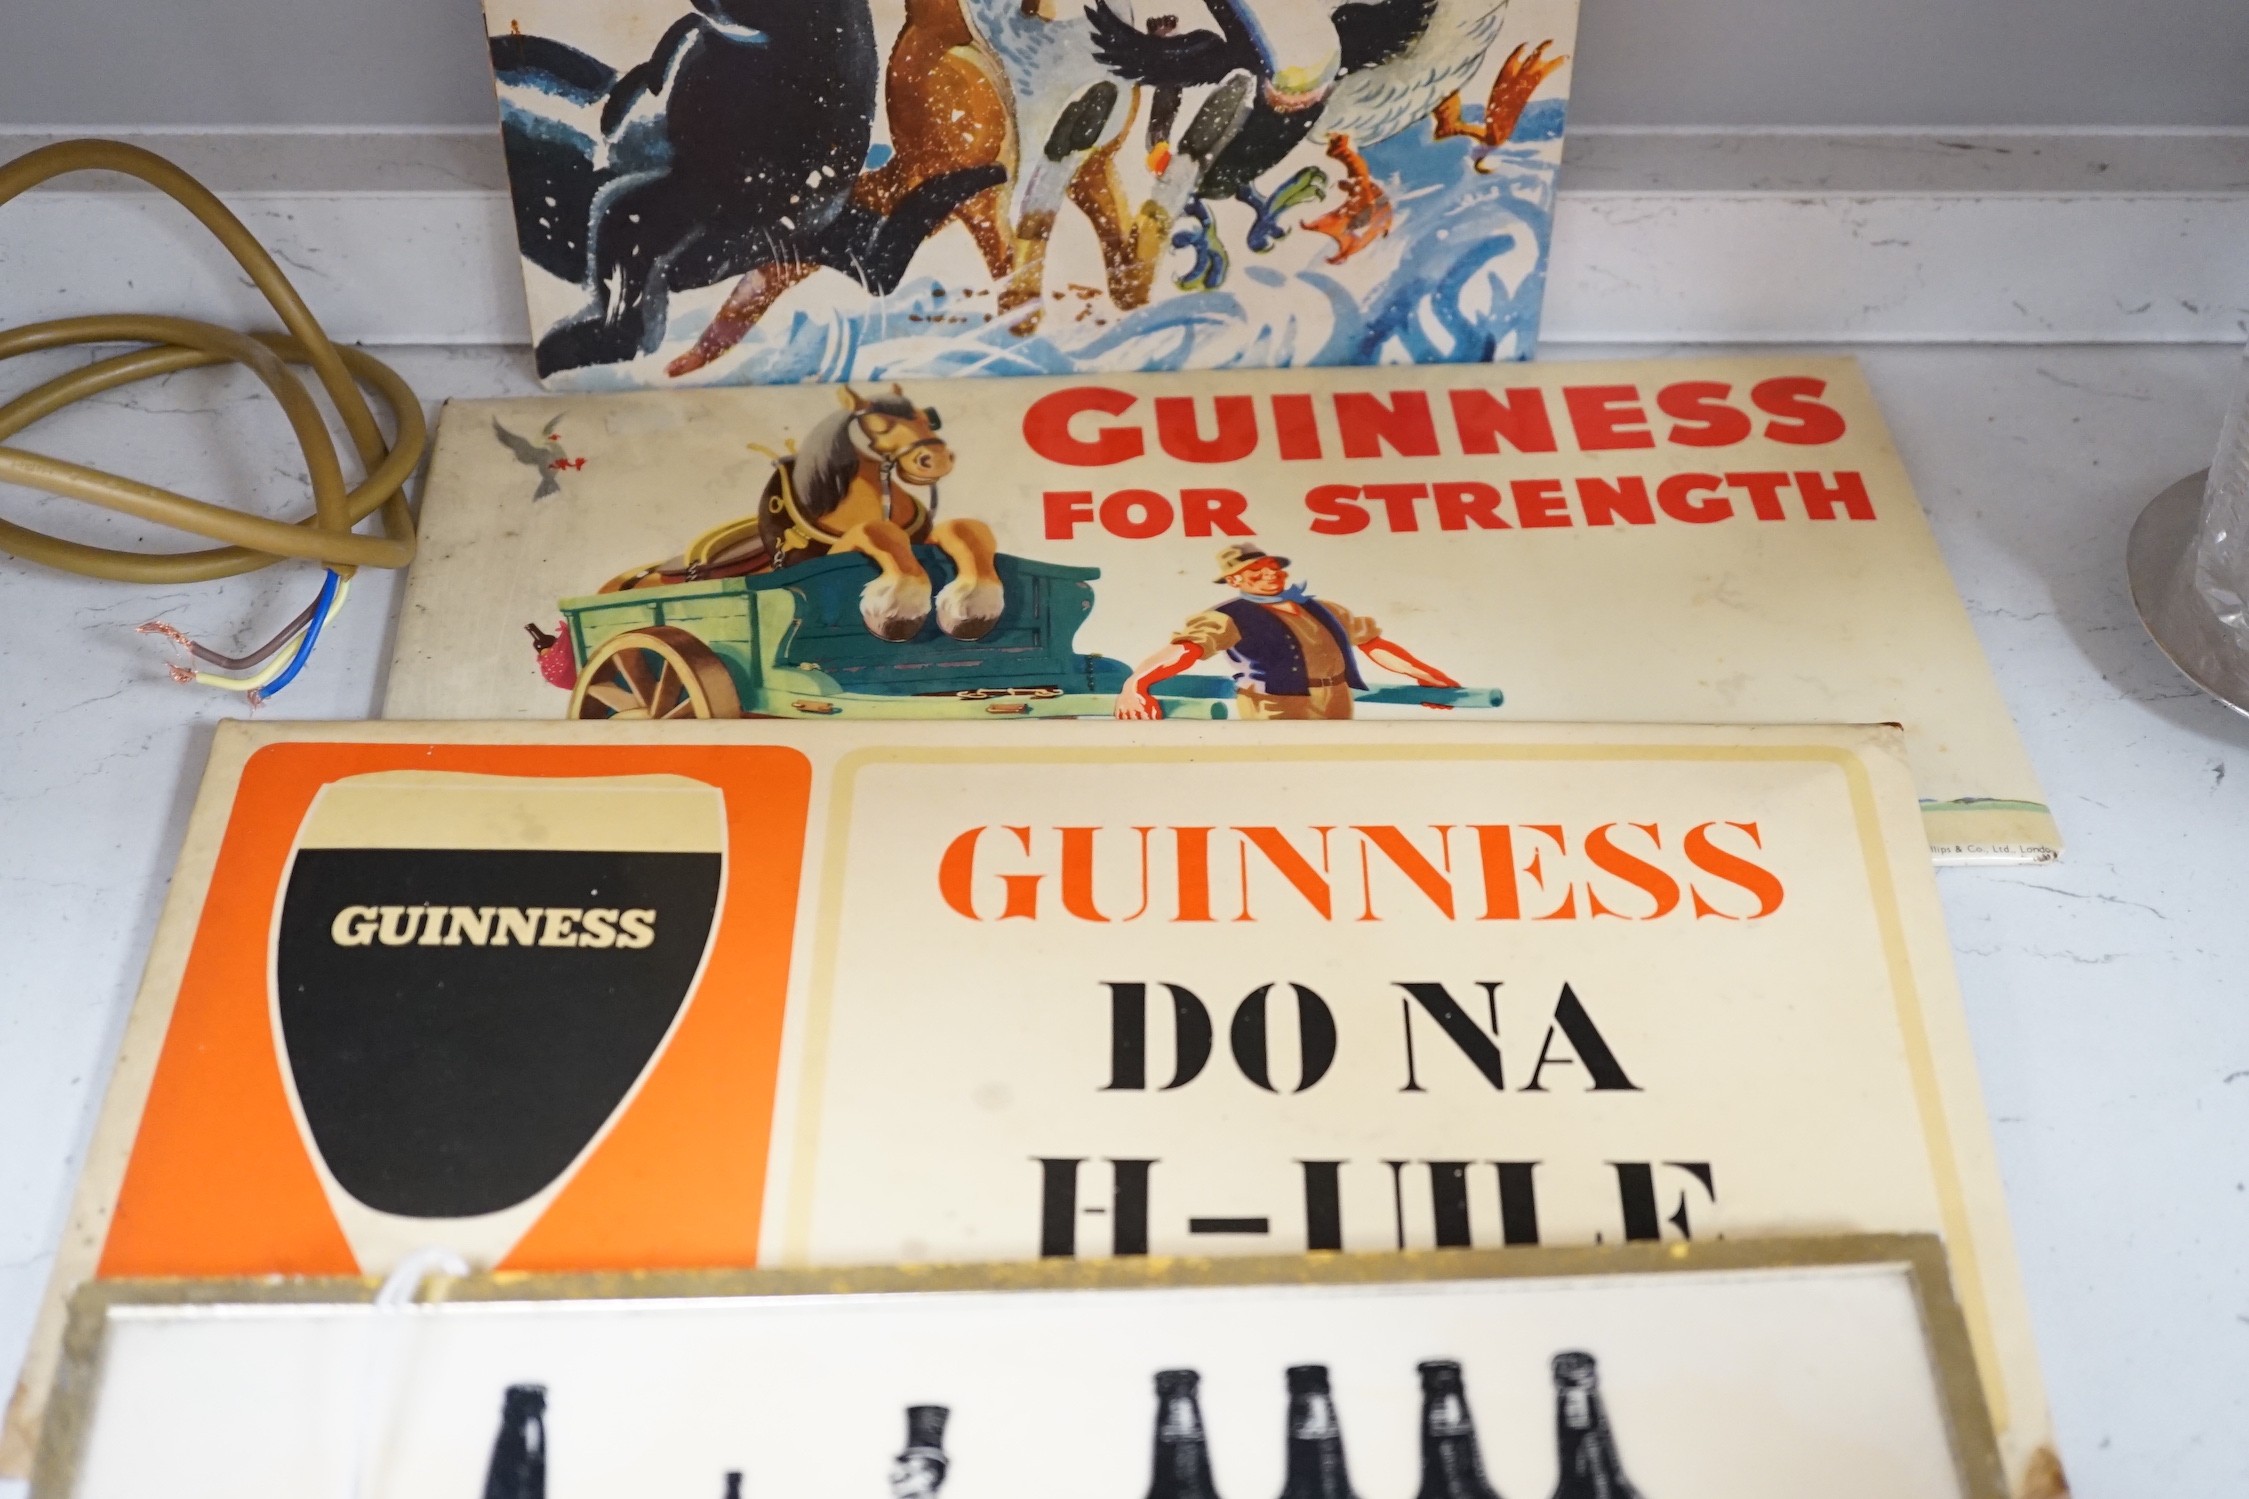 Five Guinness advertising signs, mirror, trays and a book - St. James’s Gate Brewery History and - Image 4 of 5